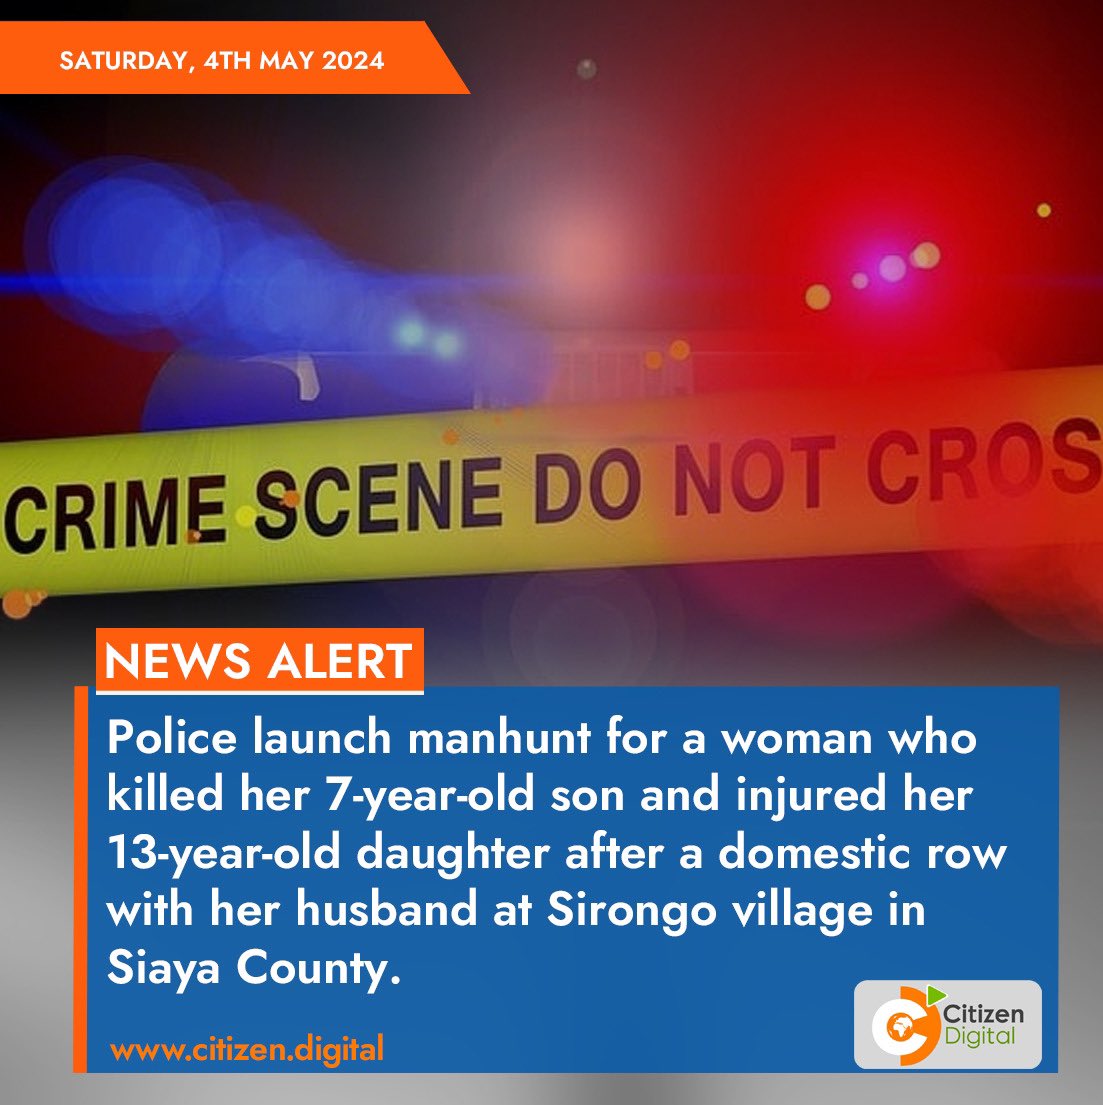 Police launch manhunt for a woman who killed her 7-year-old son and injured her 13-year-old daughter after a domestic row with her husband at Sirongo village in Siaya County